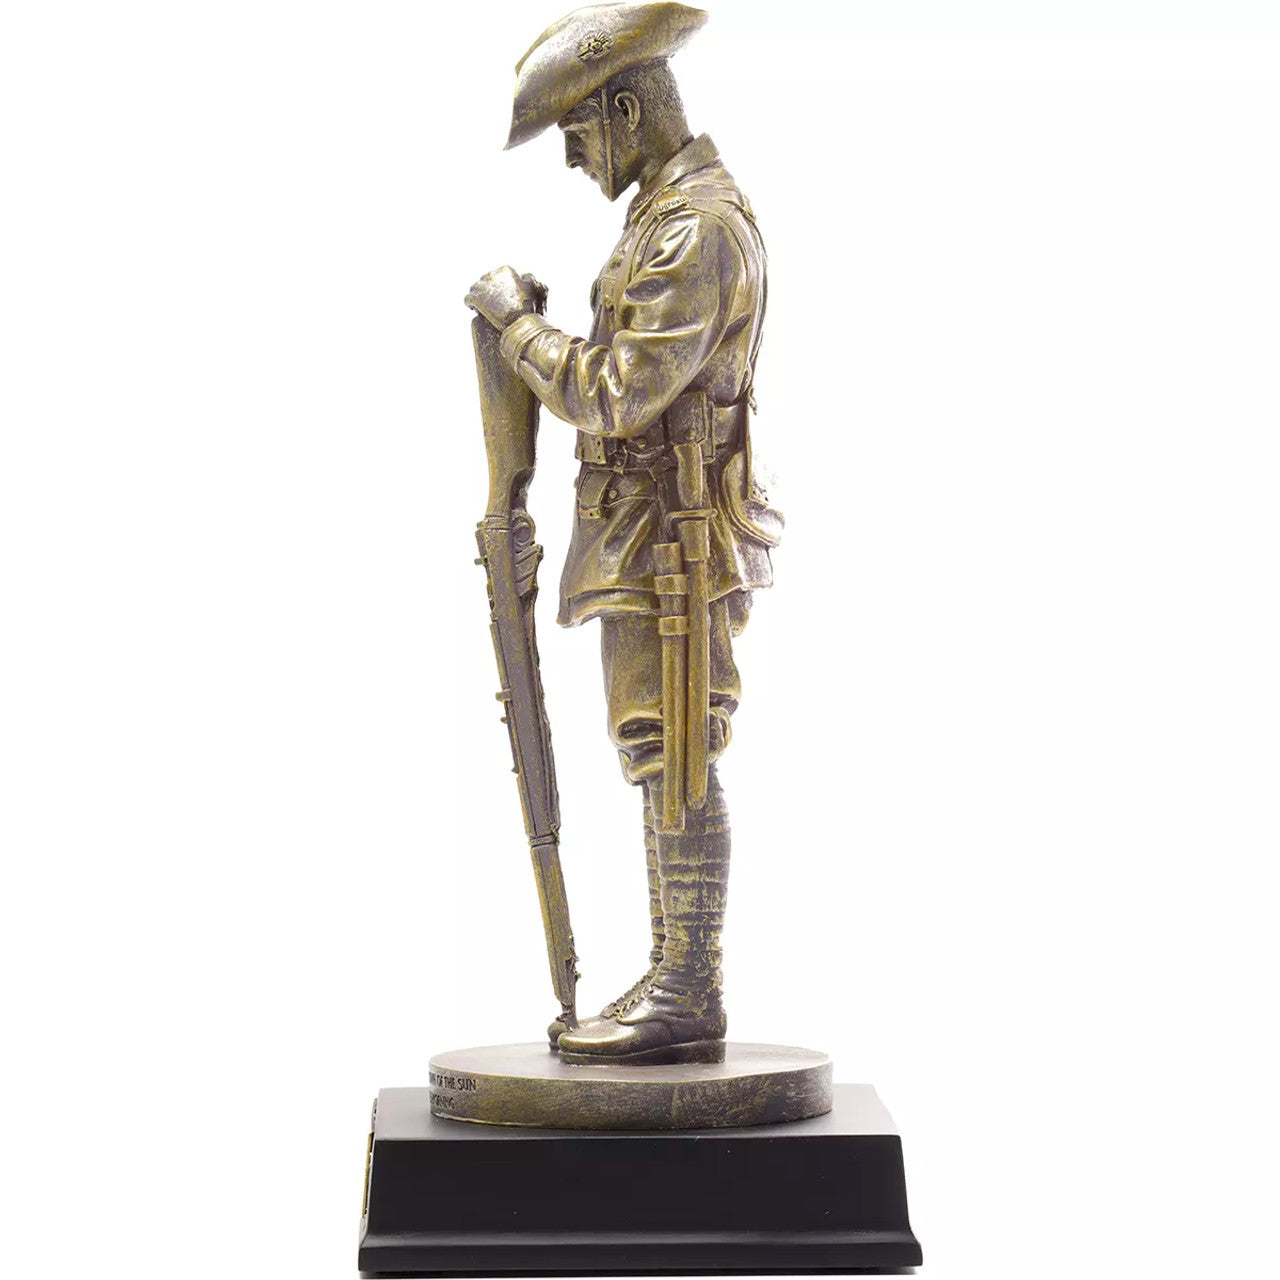 Sands of Gallipoli Figurine  In memory of those who made the ultimate sacrific